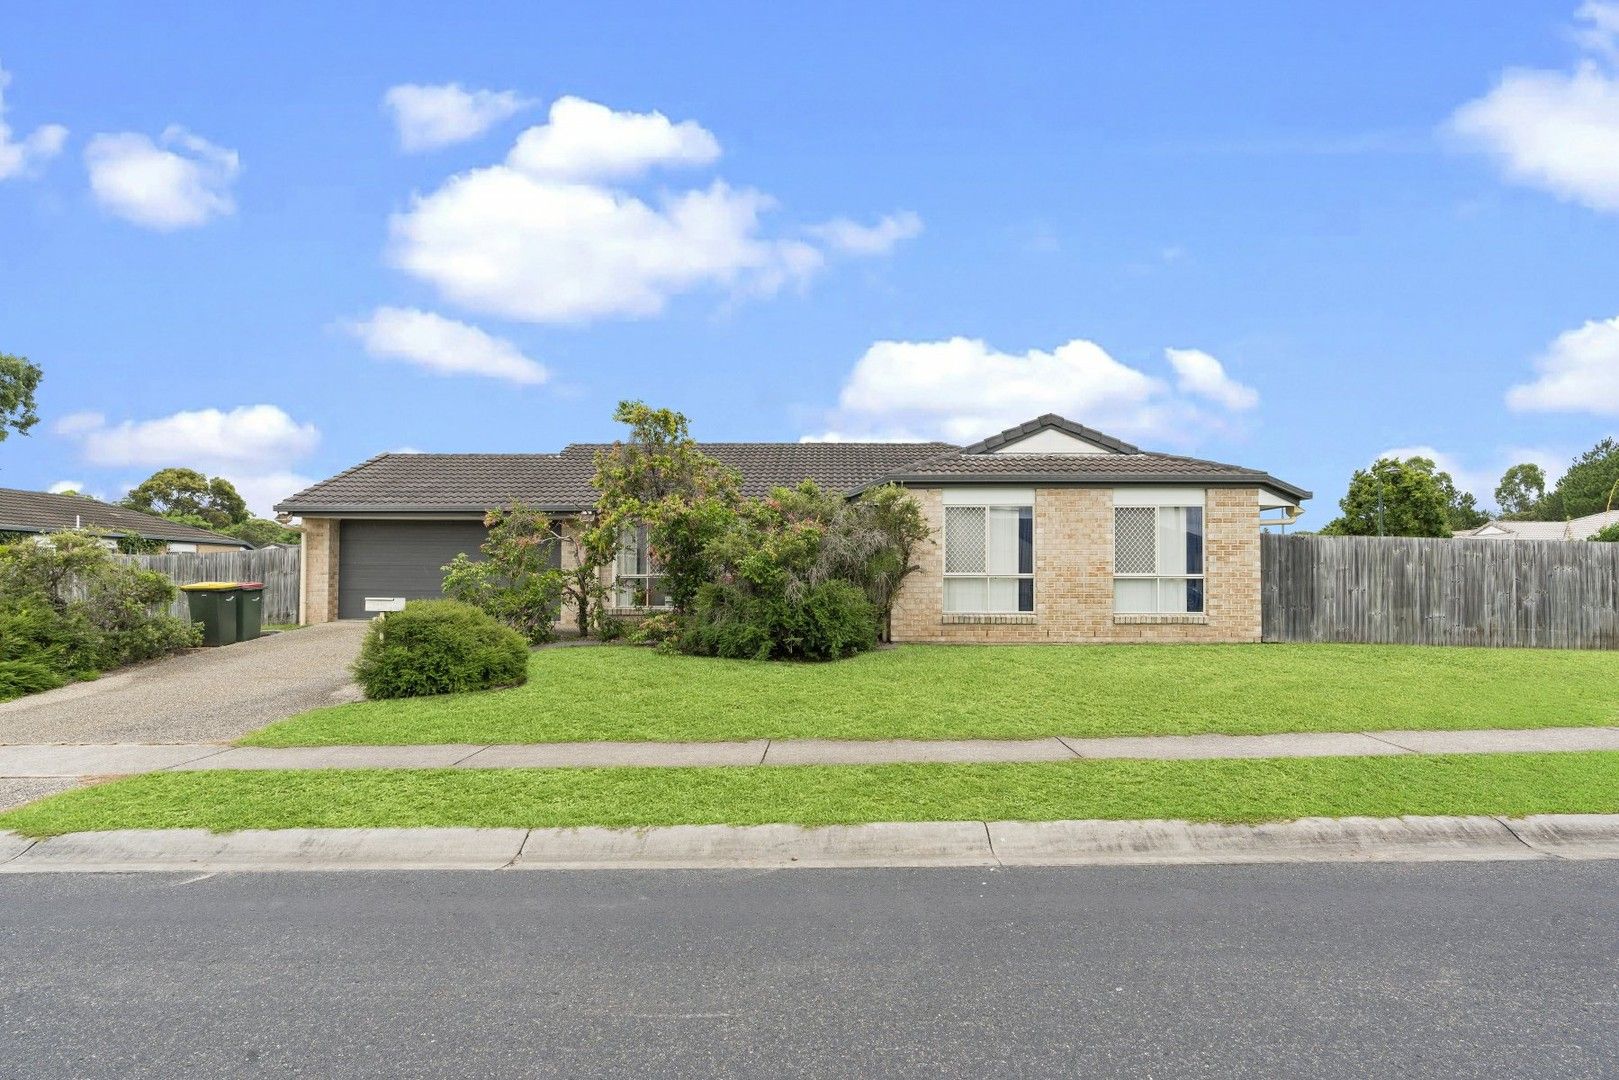 4 bedrooms House in 81-83 Fernbrook Drive MORAYFIELD QLD, 4506